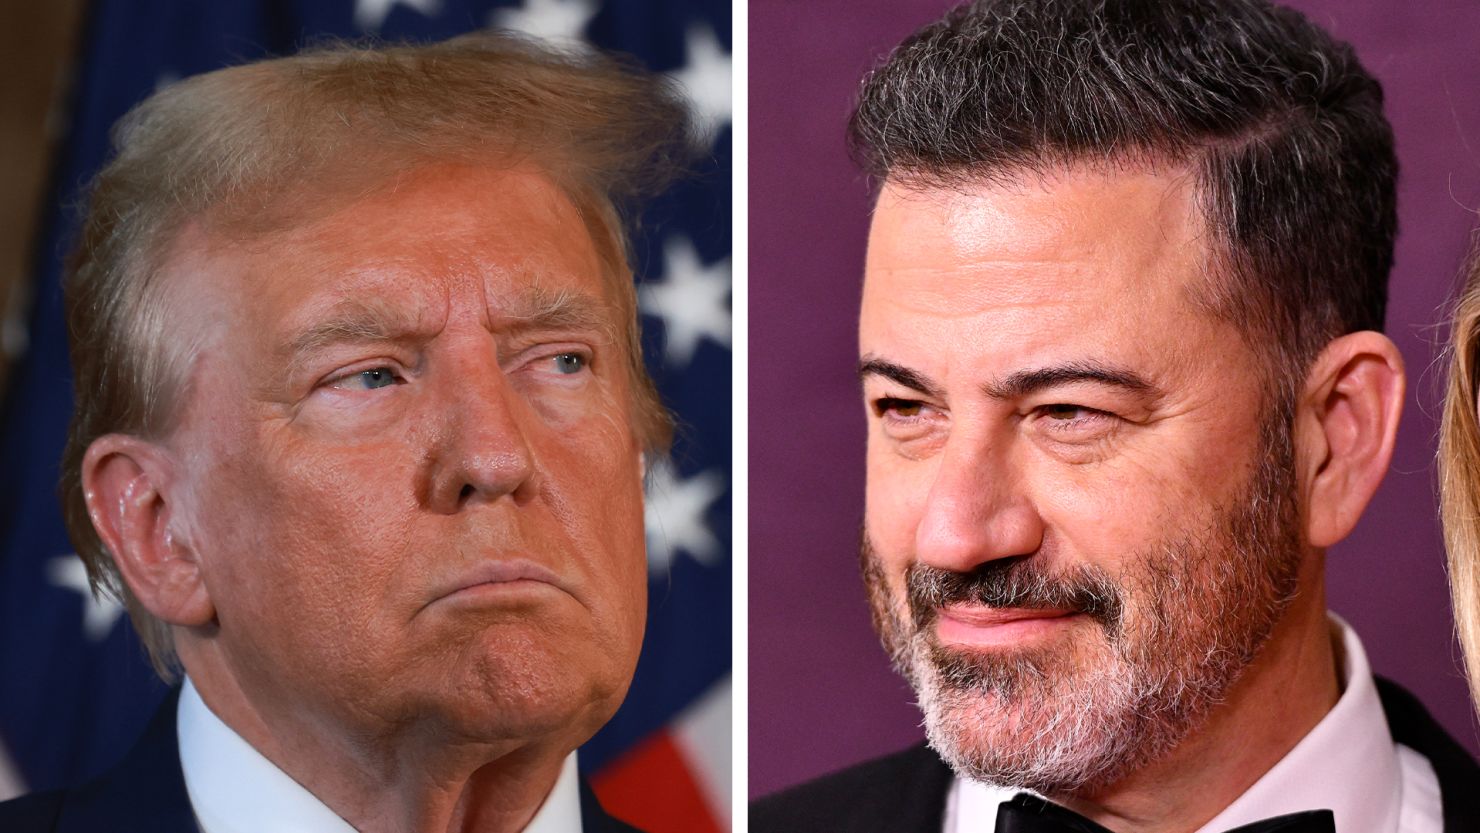 Former President Donald Trump and Jimmy Kimmel.